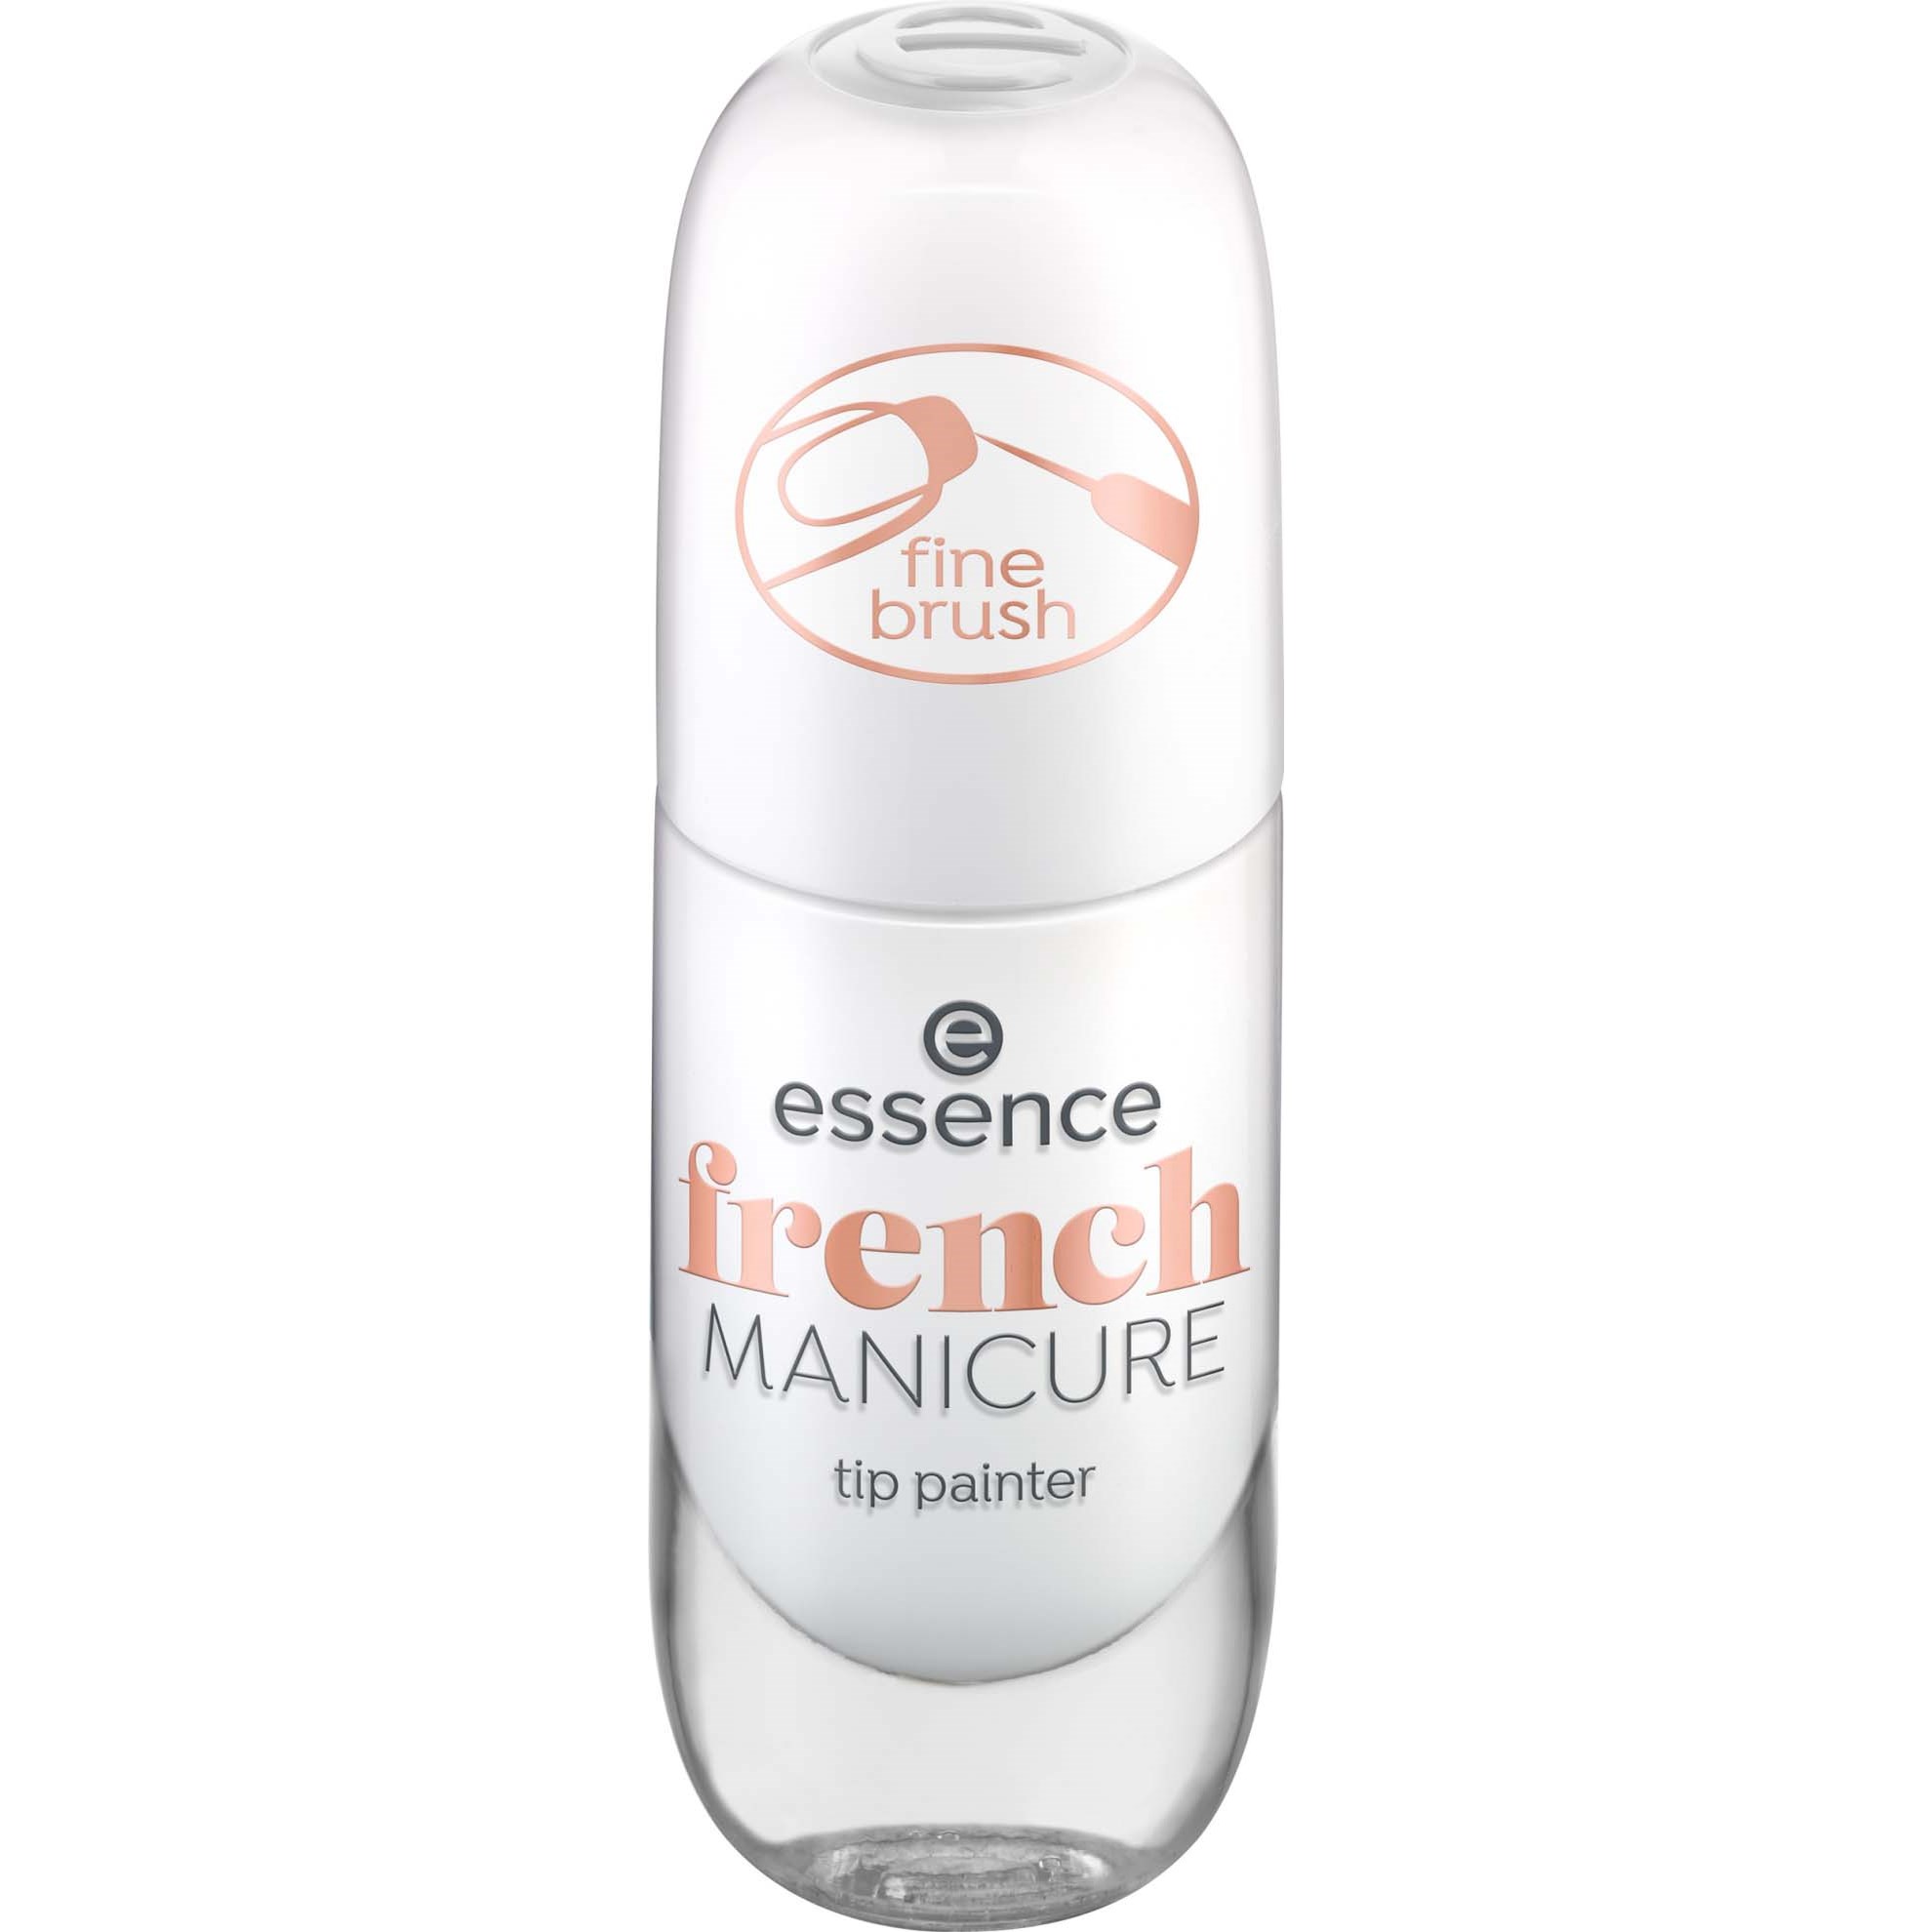 essence French Manicure Tip Painter 01 Youre so fine